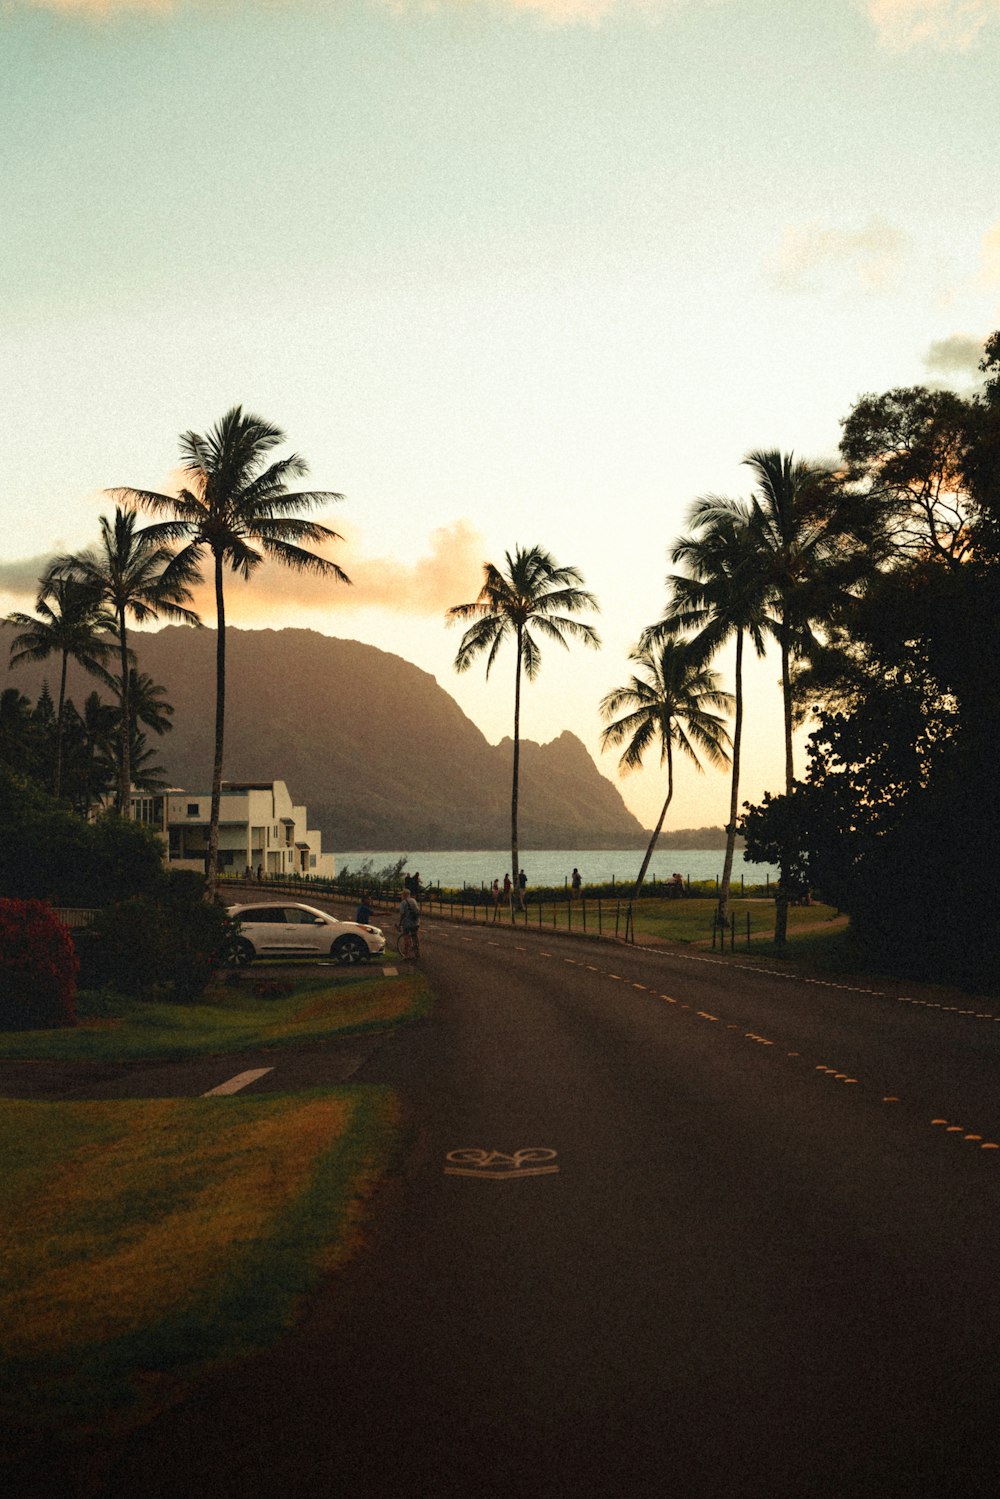 a road with palm trees and a body of water in the background